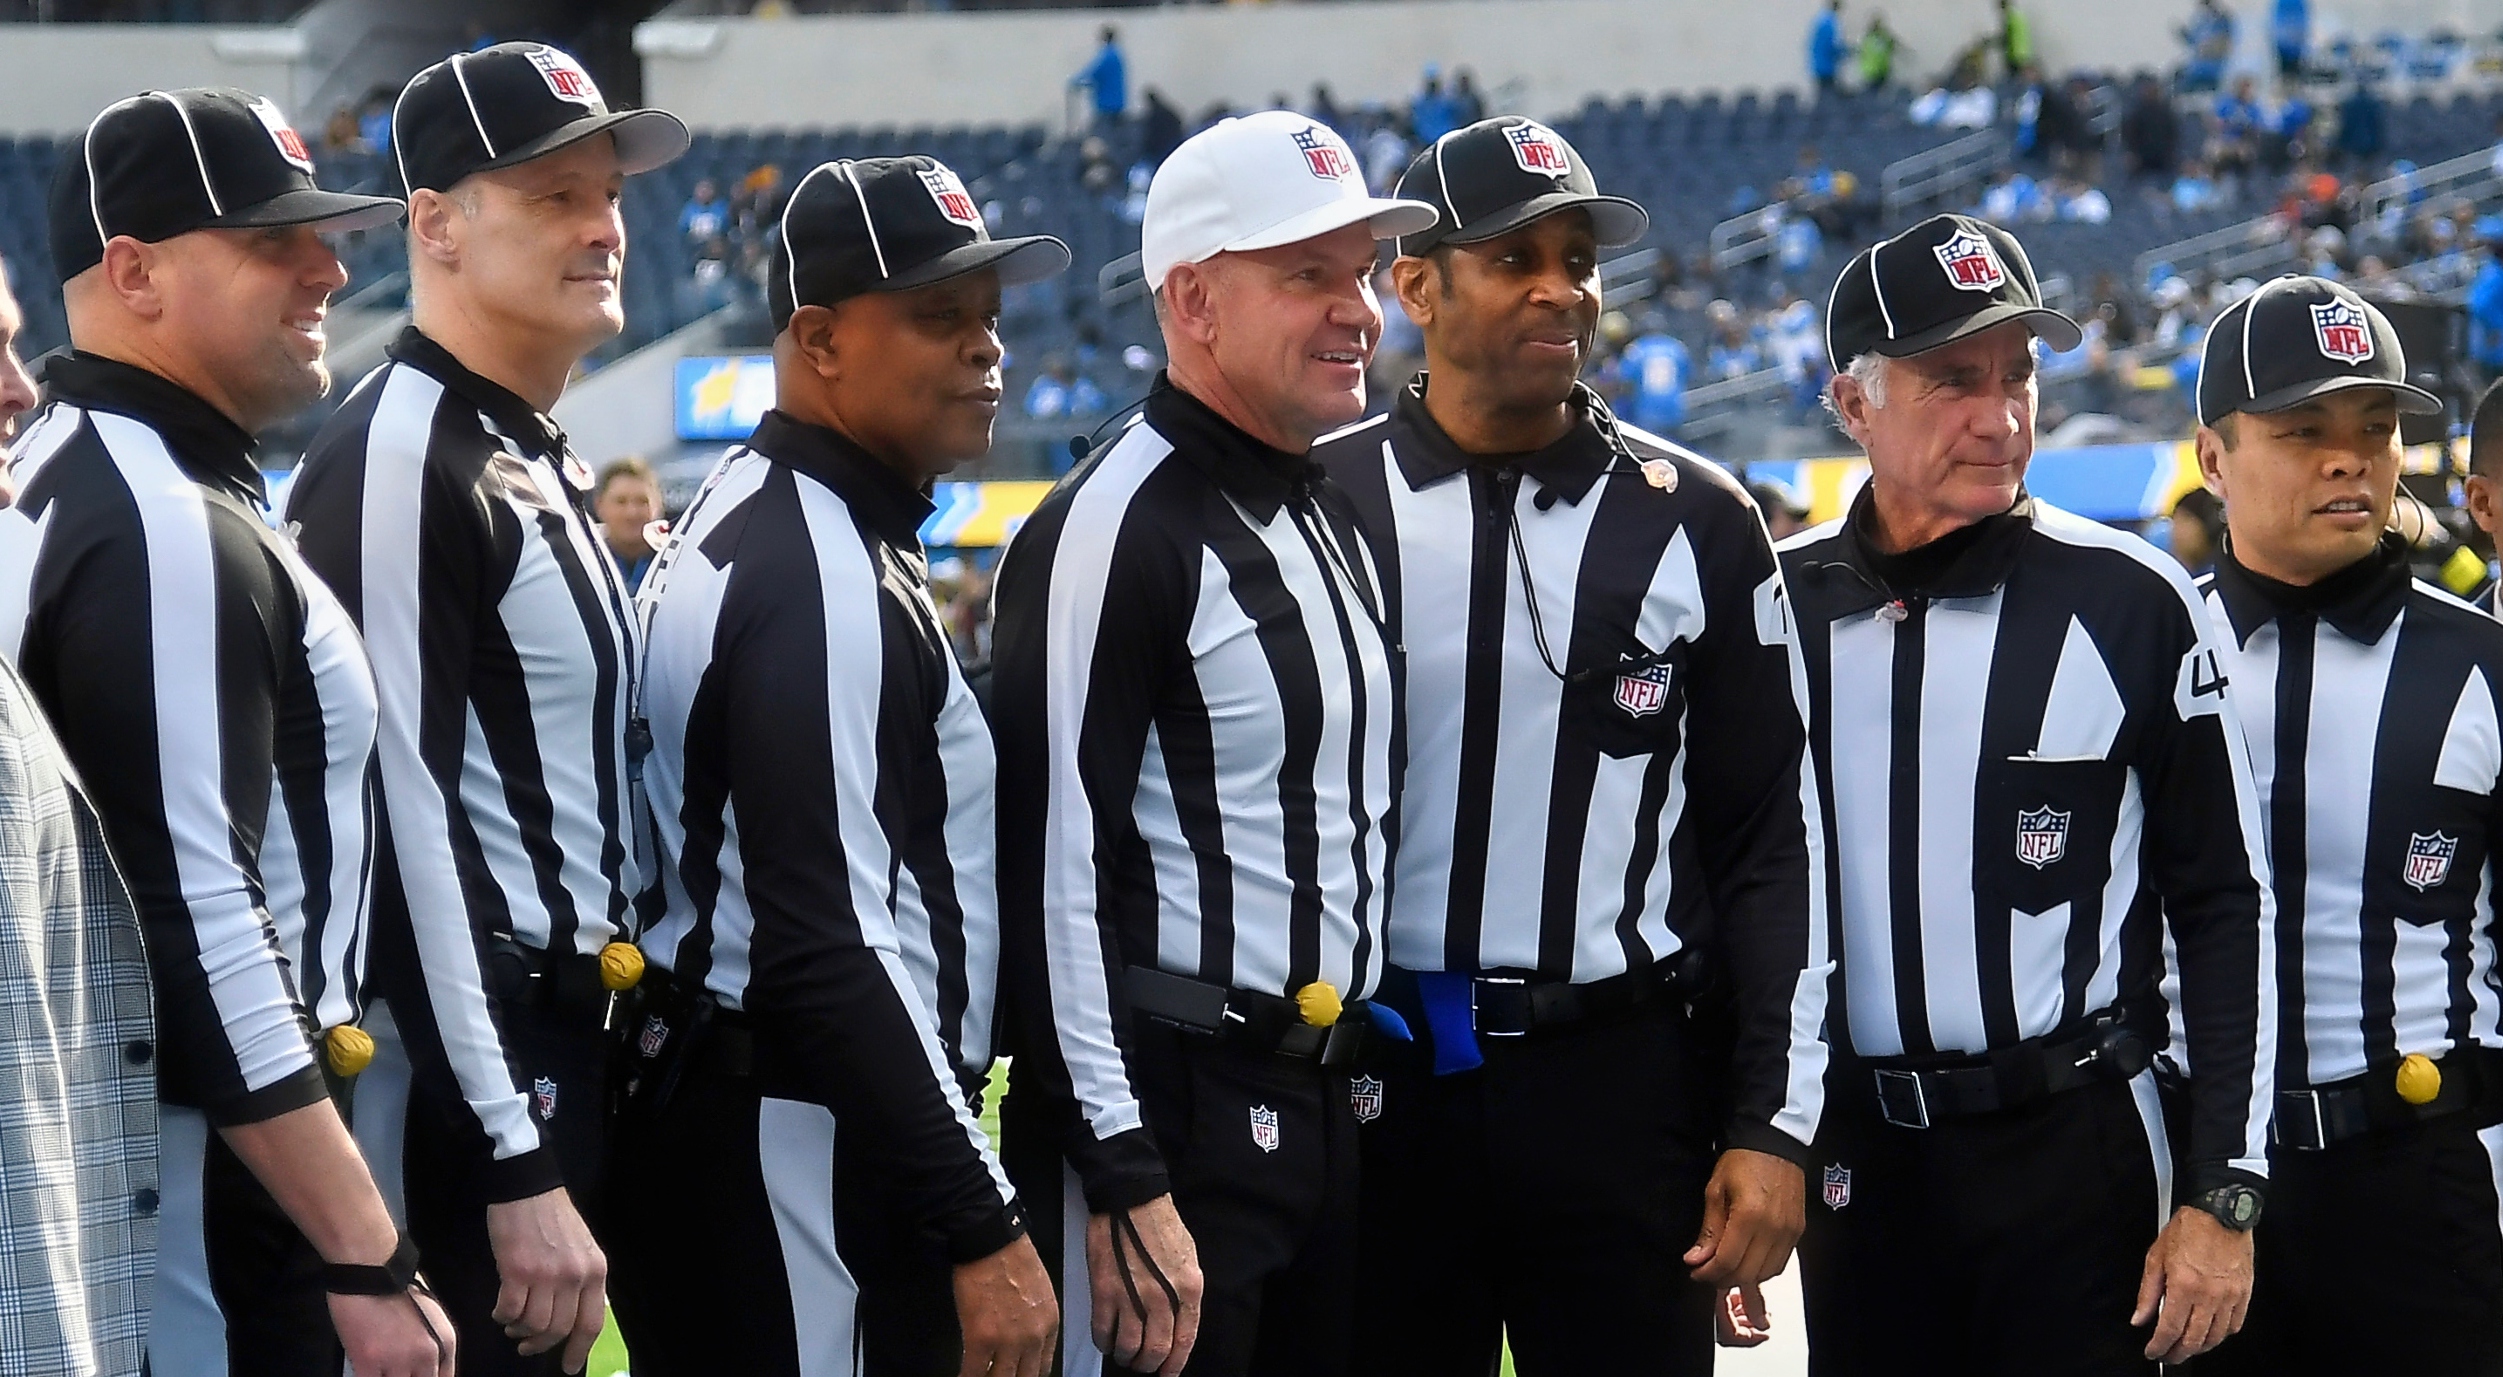 For NFL officials, it's a side job that requires a lot of work